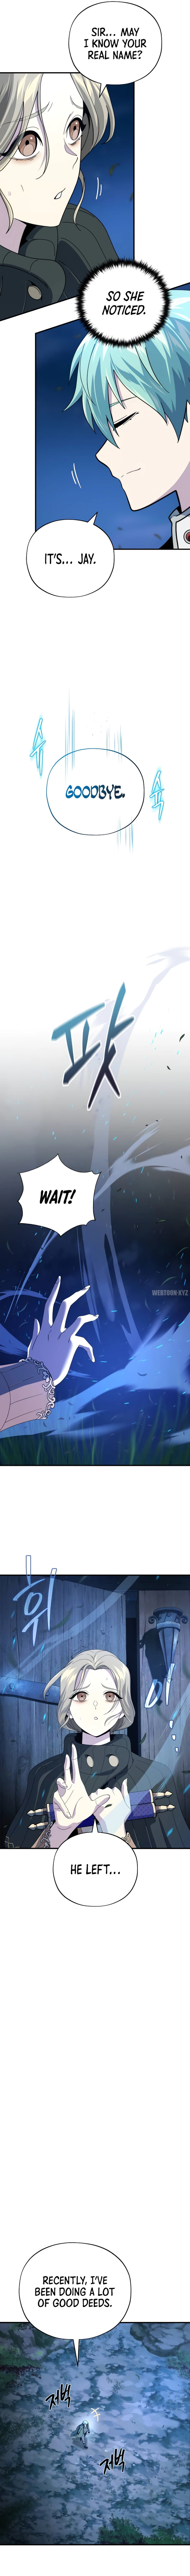 Reincarnated Into A Warlock 66,666 Years Later - Chapter 112 Page 13